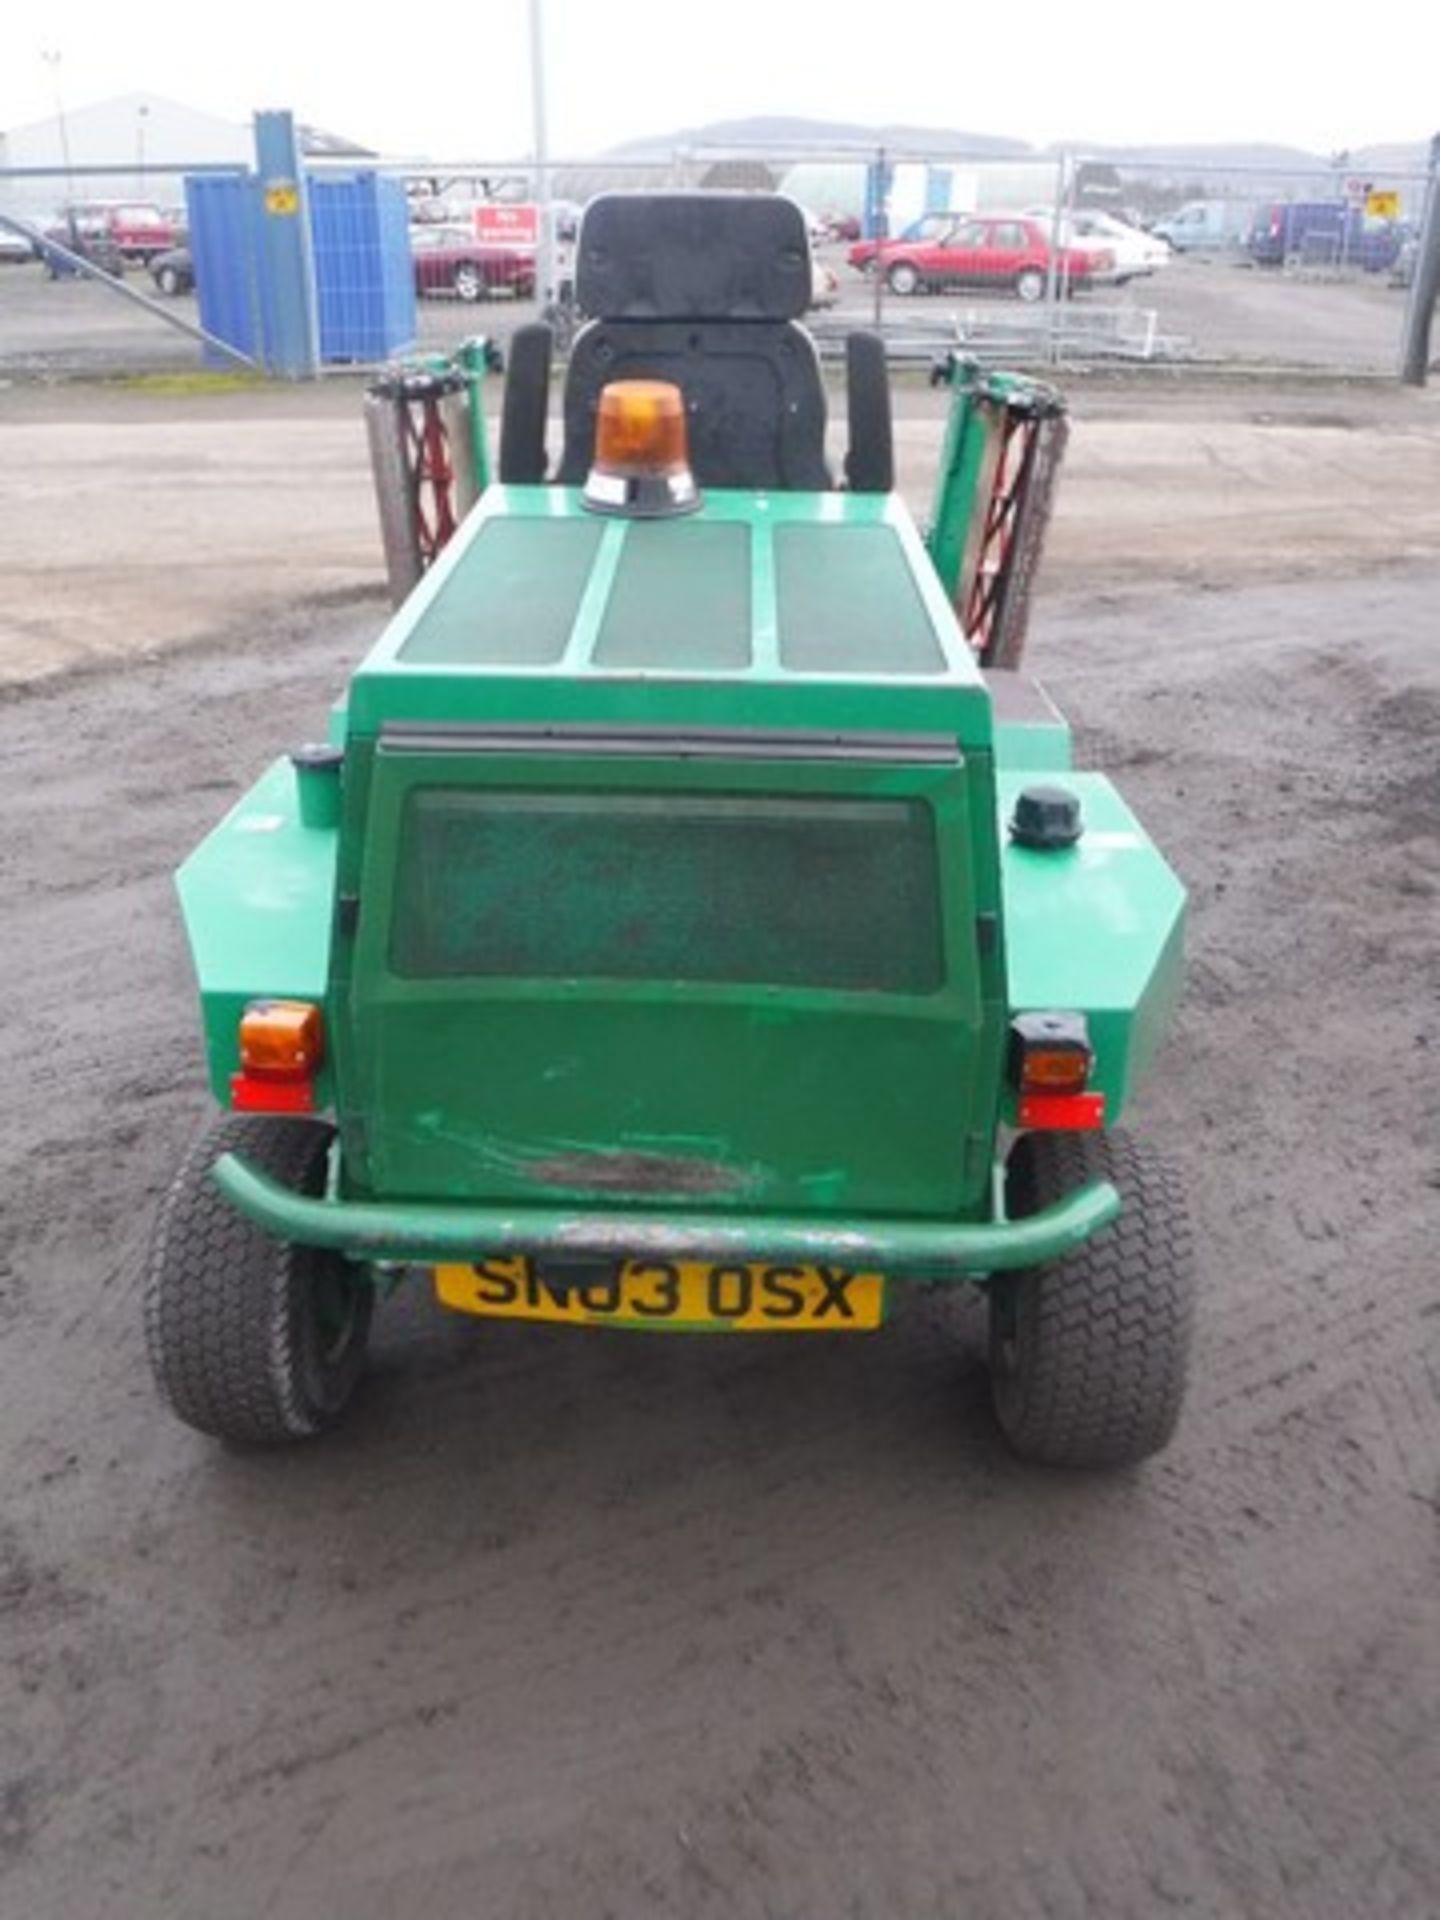 RANSOMES highway mower. 3351hrs.S/N WJ000723. Reg No. SN03 OSX - Image 3 of 7